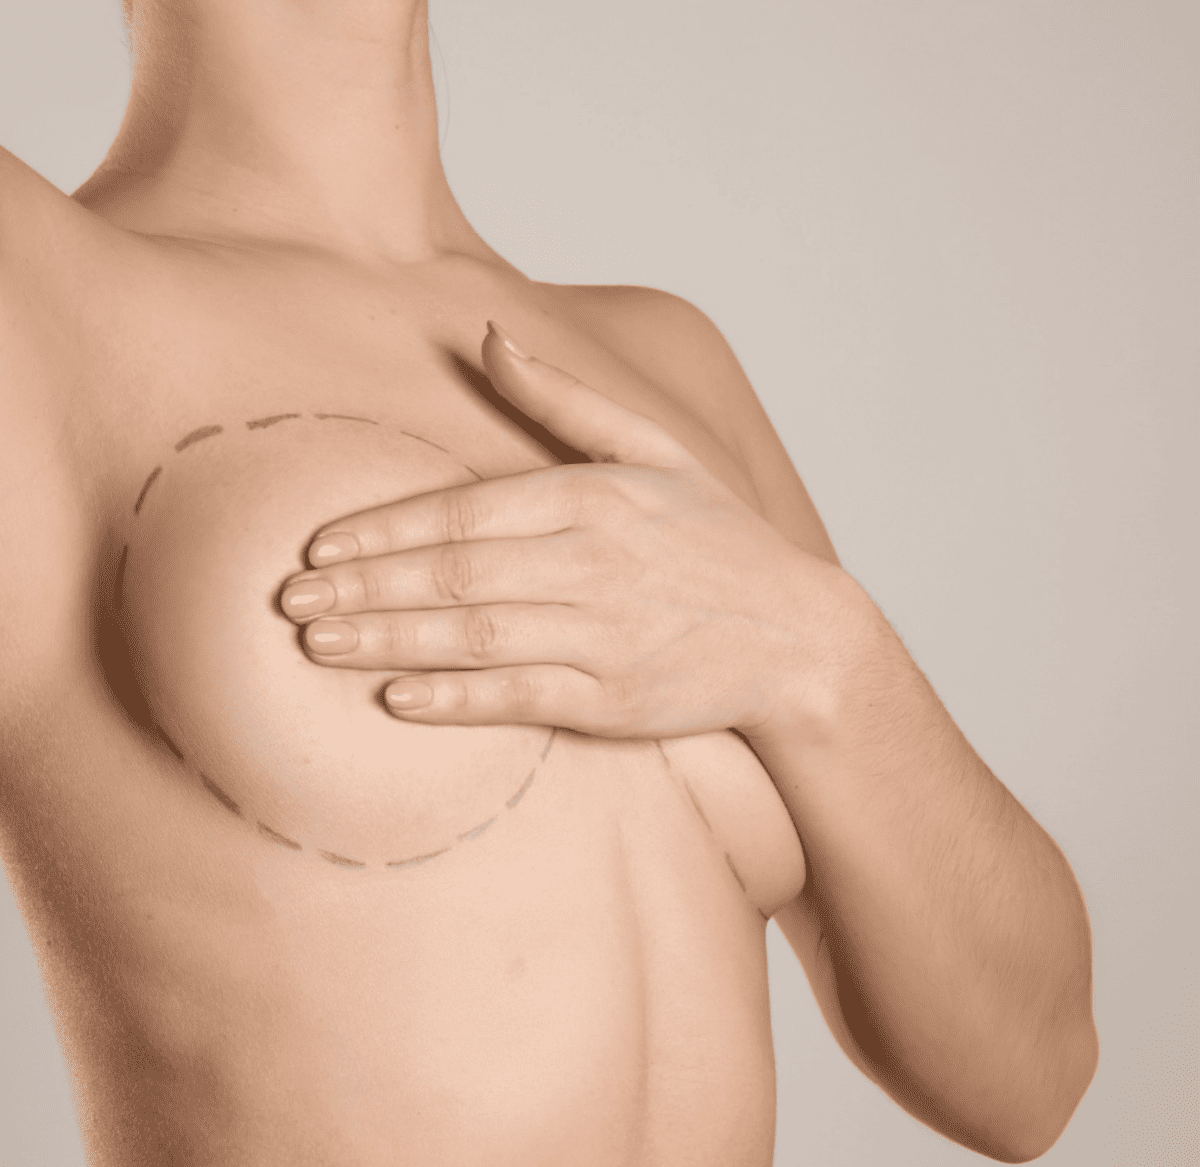 Breast Implant Illness is a term that has emerged from the collective experiences of women who report a range of symptoms after undergoing breast augmentation.